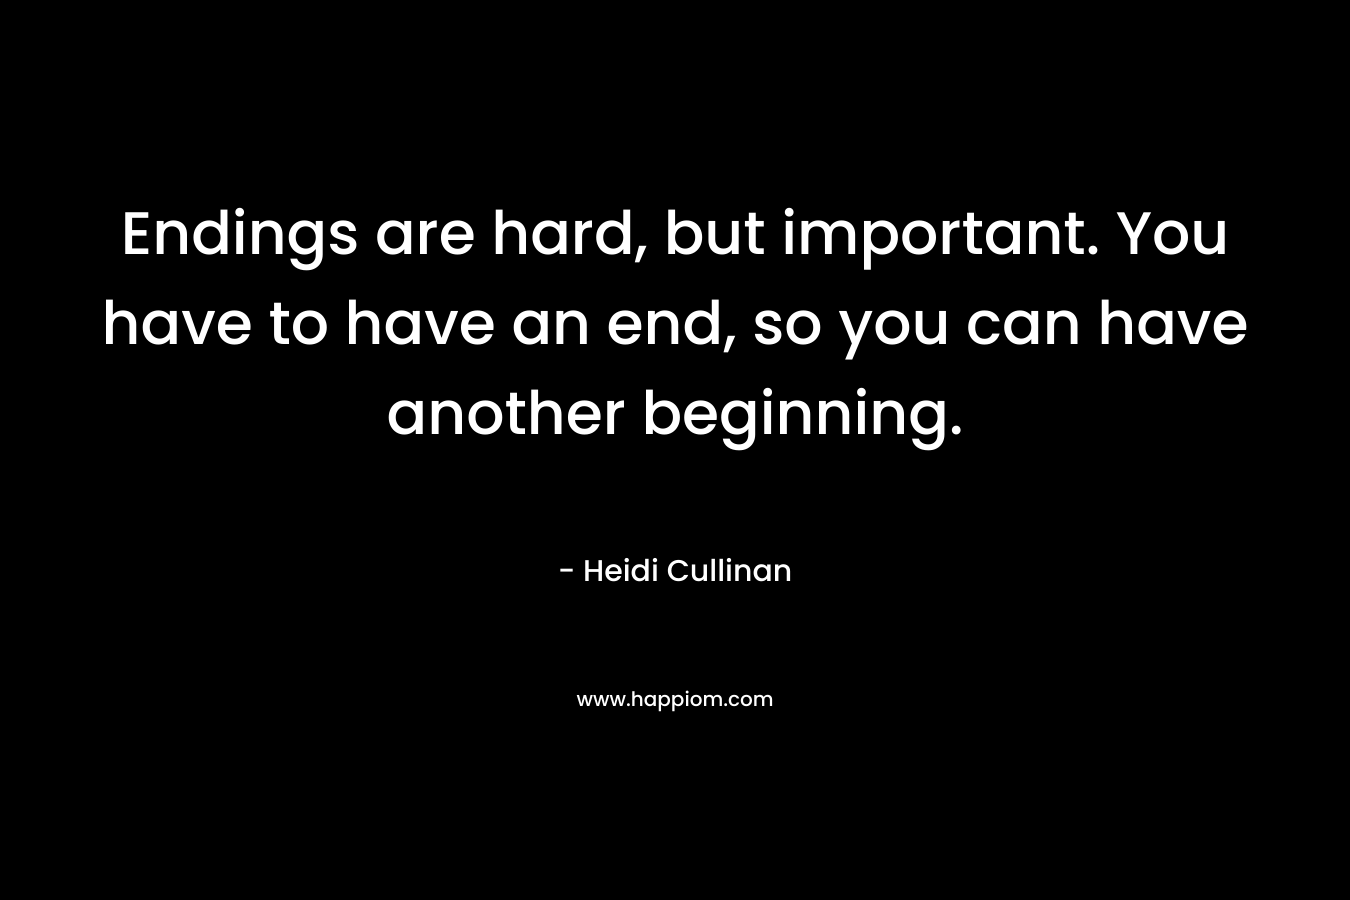 Endings are hard, but important. You have to have an end, so you can have another beginning.